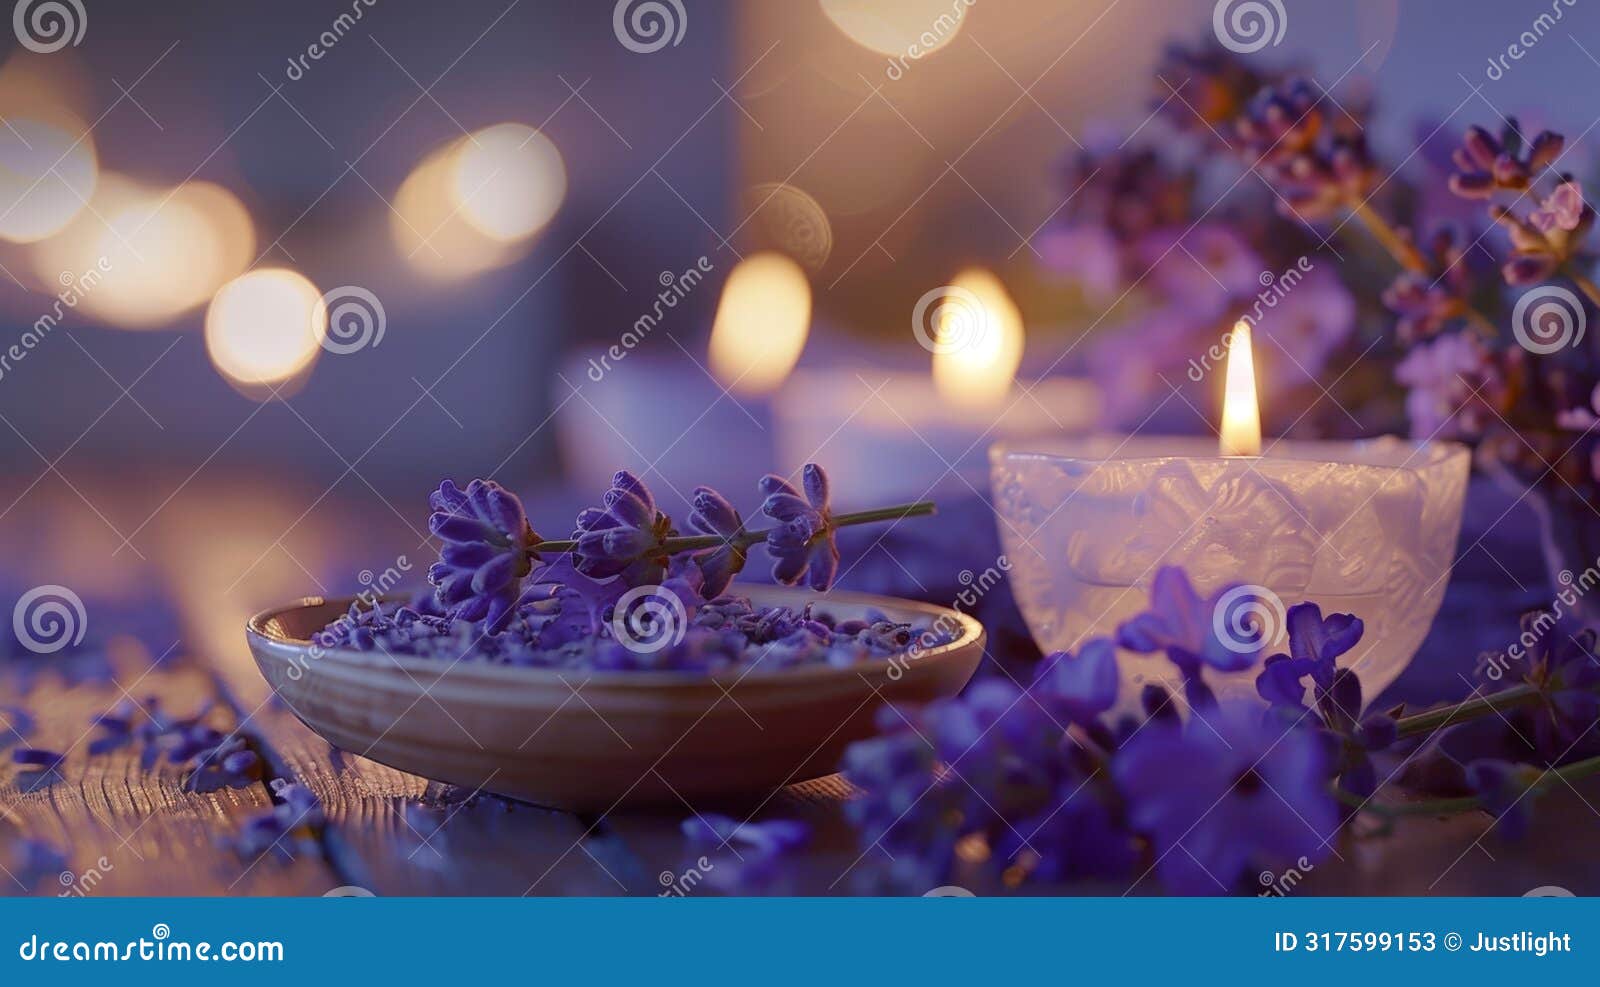 aromatherapy scents of lavender and eucalyptus fill the air enhancing the relaxation experience